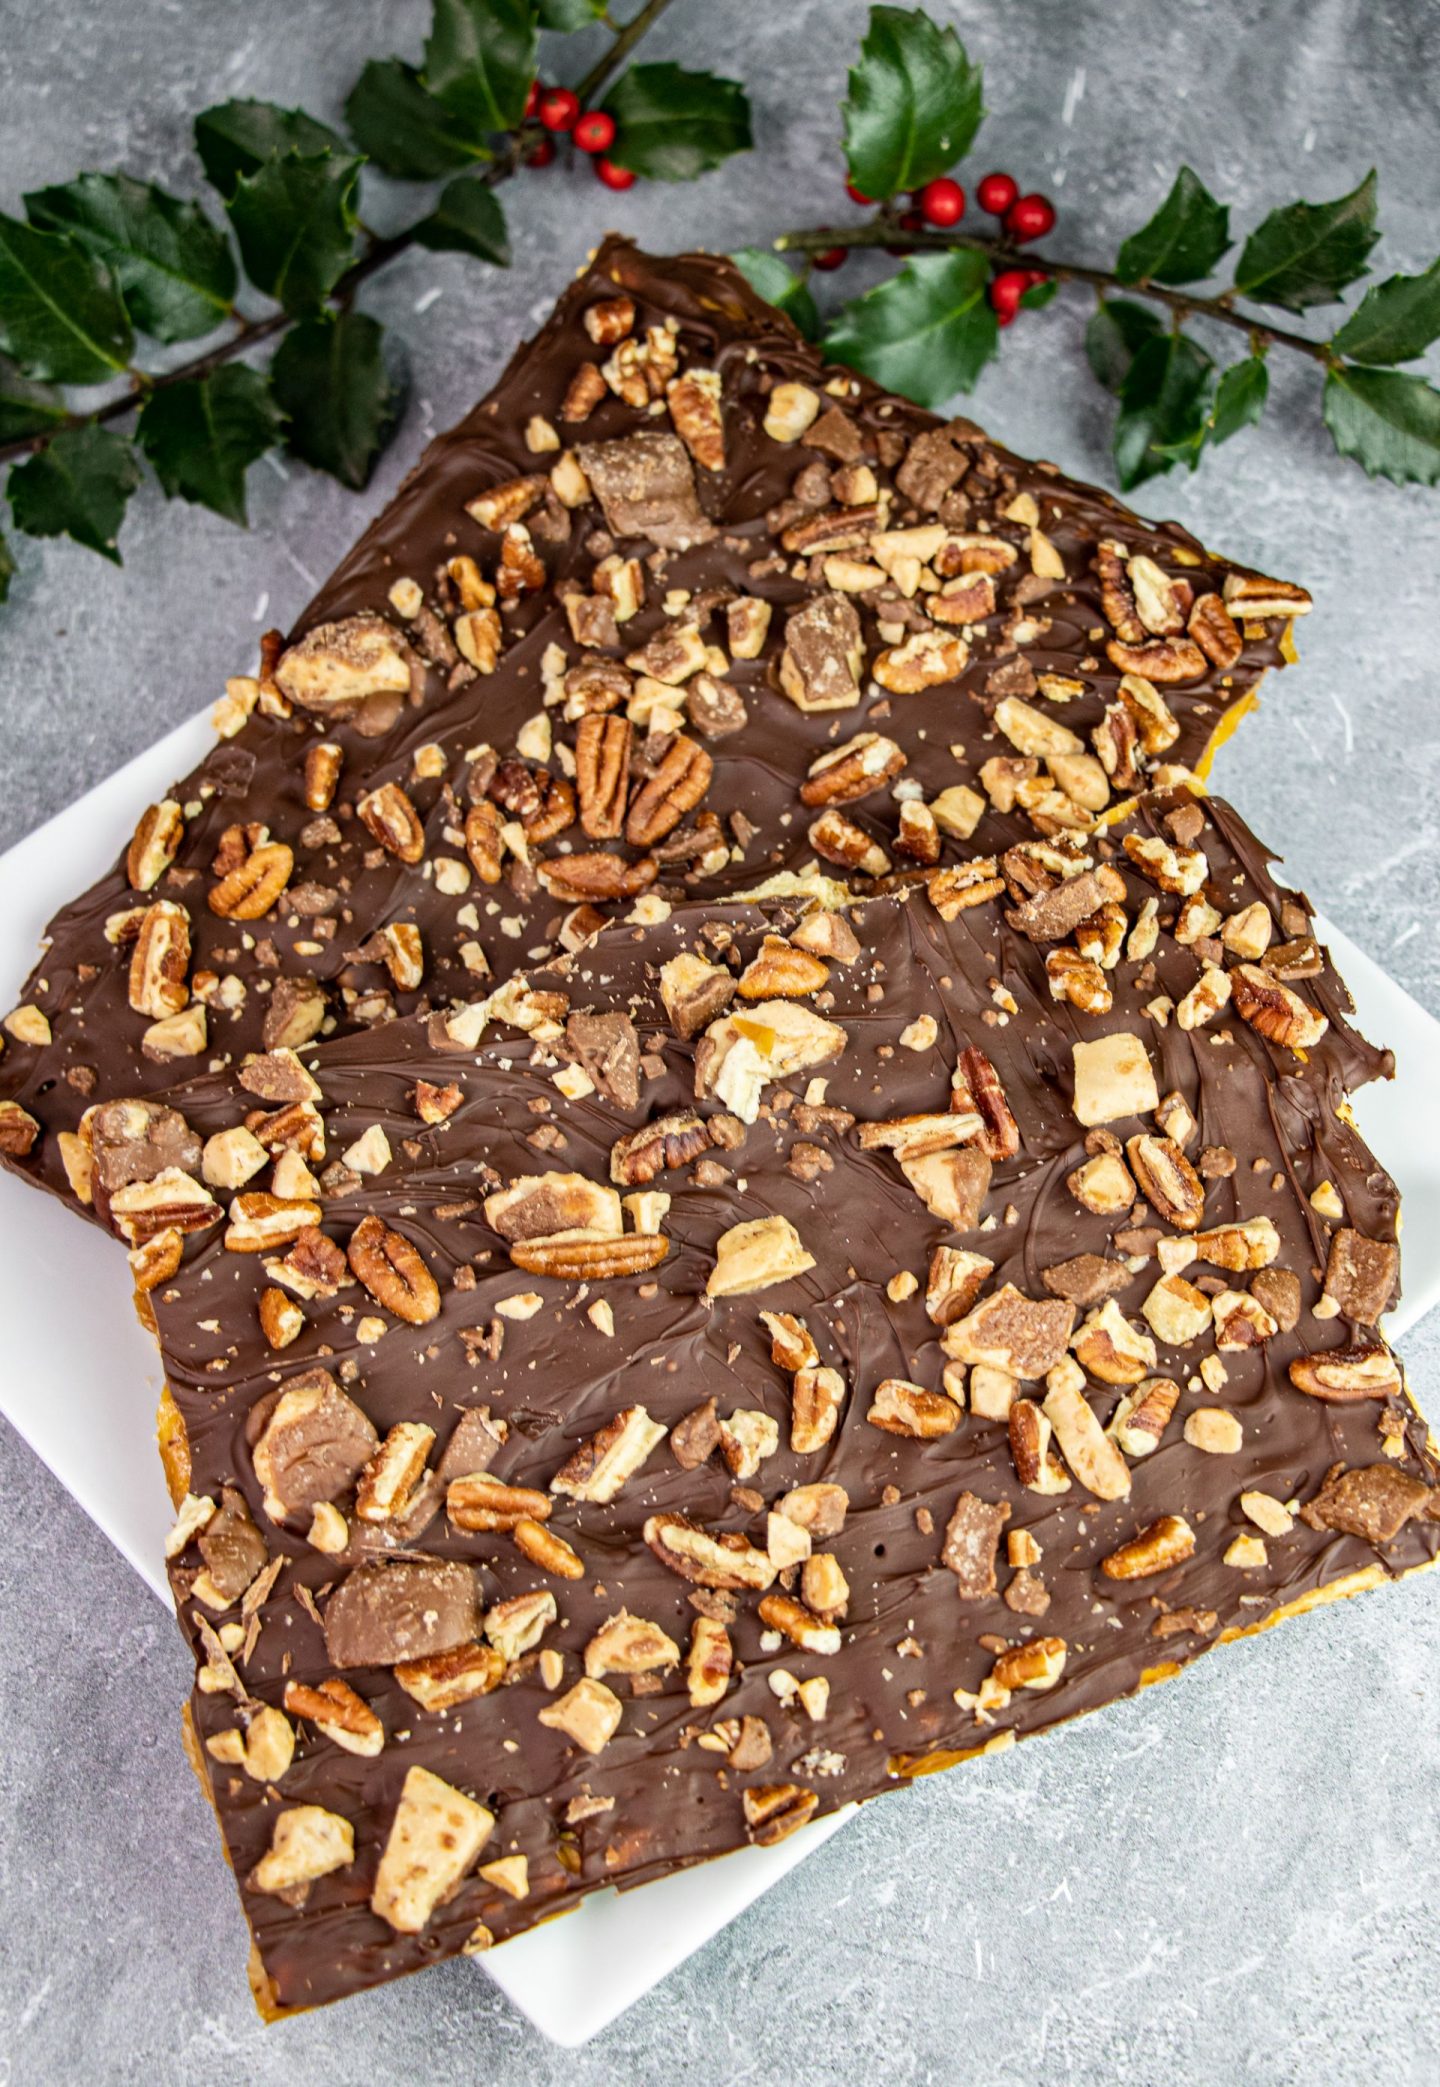 
So deliciously addictive (hence the name!), these Saltine Toffee Bark (AKA Christmas Crack) tastes sweet, salty, chocolaty, and just 20 minutes or less to make! It reminds me of brittle candy but oh-so-much-better and so much simpler to make! Perfect as a holiday gift!
